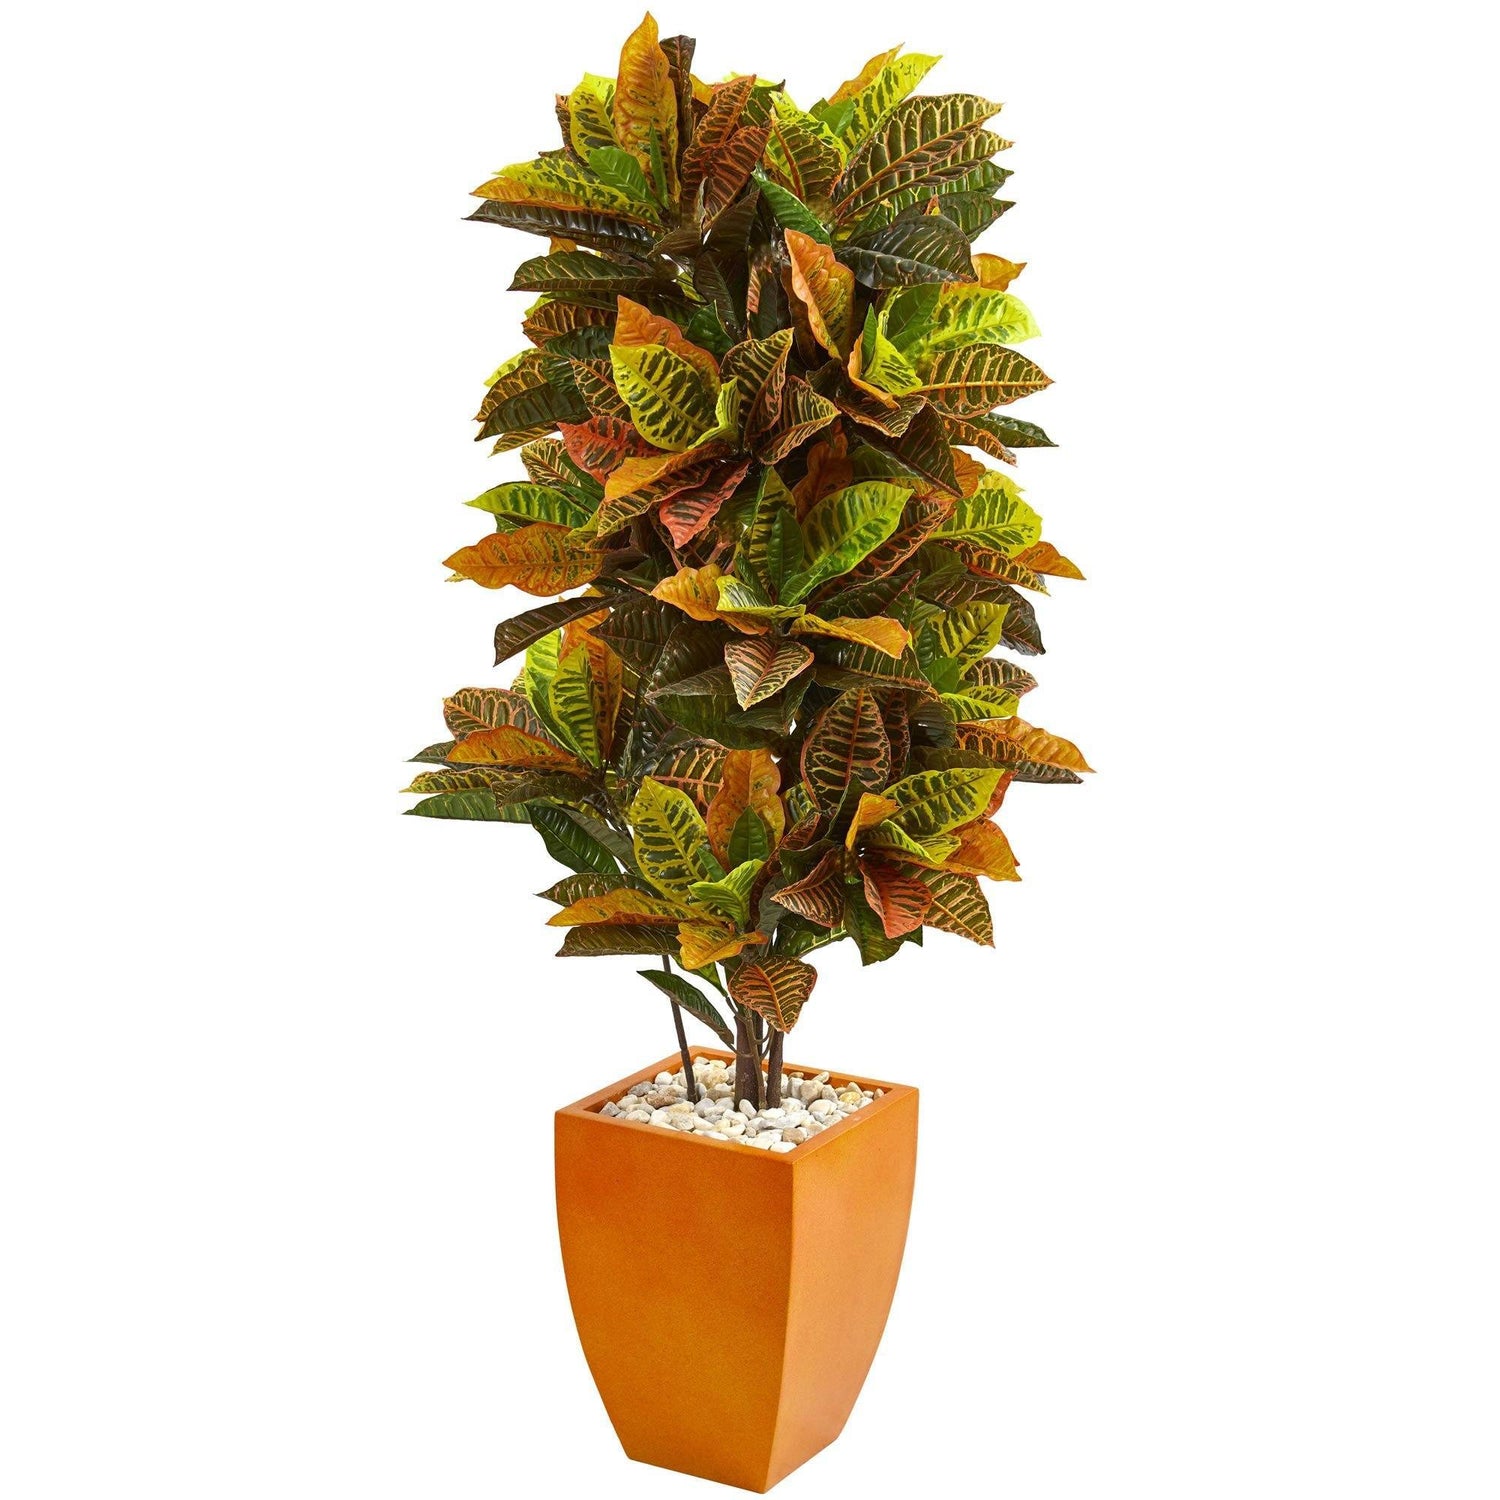 5.5’ Croton Artificial Plant in Orange Planter (Real Touch)